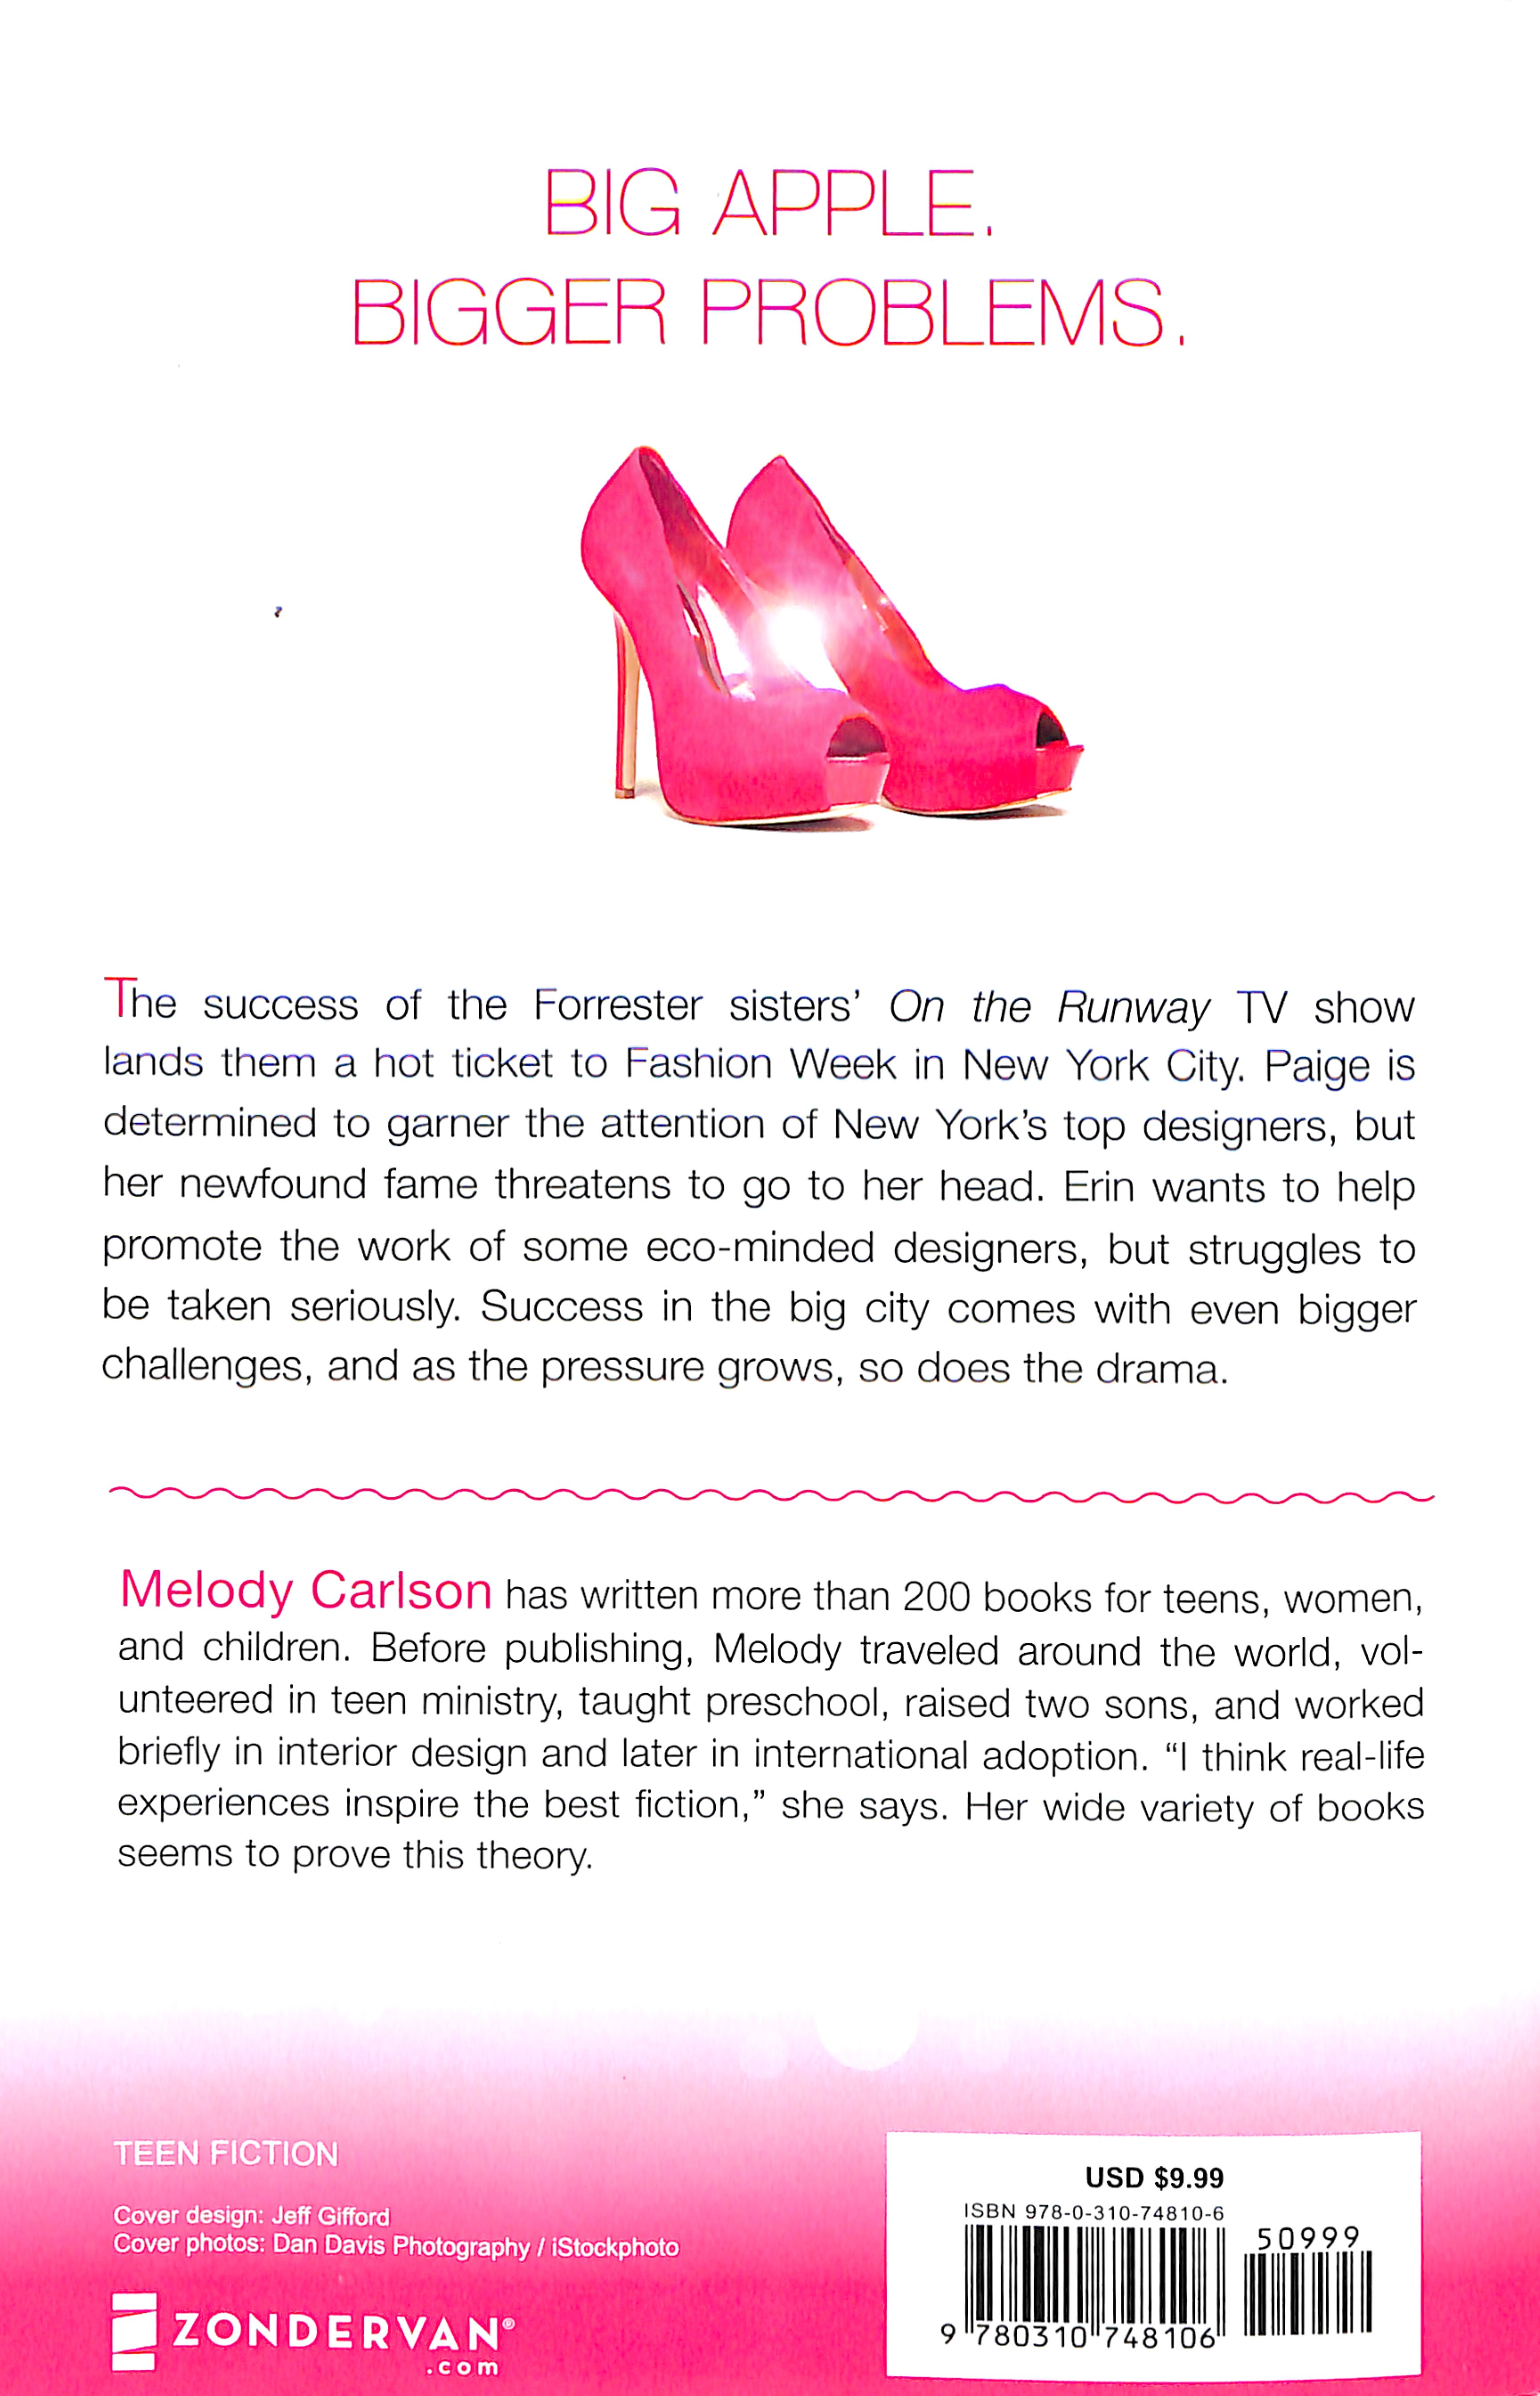 On The Runway Series book 2 Catwalk by Melody Carlson